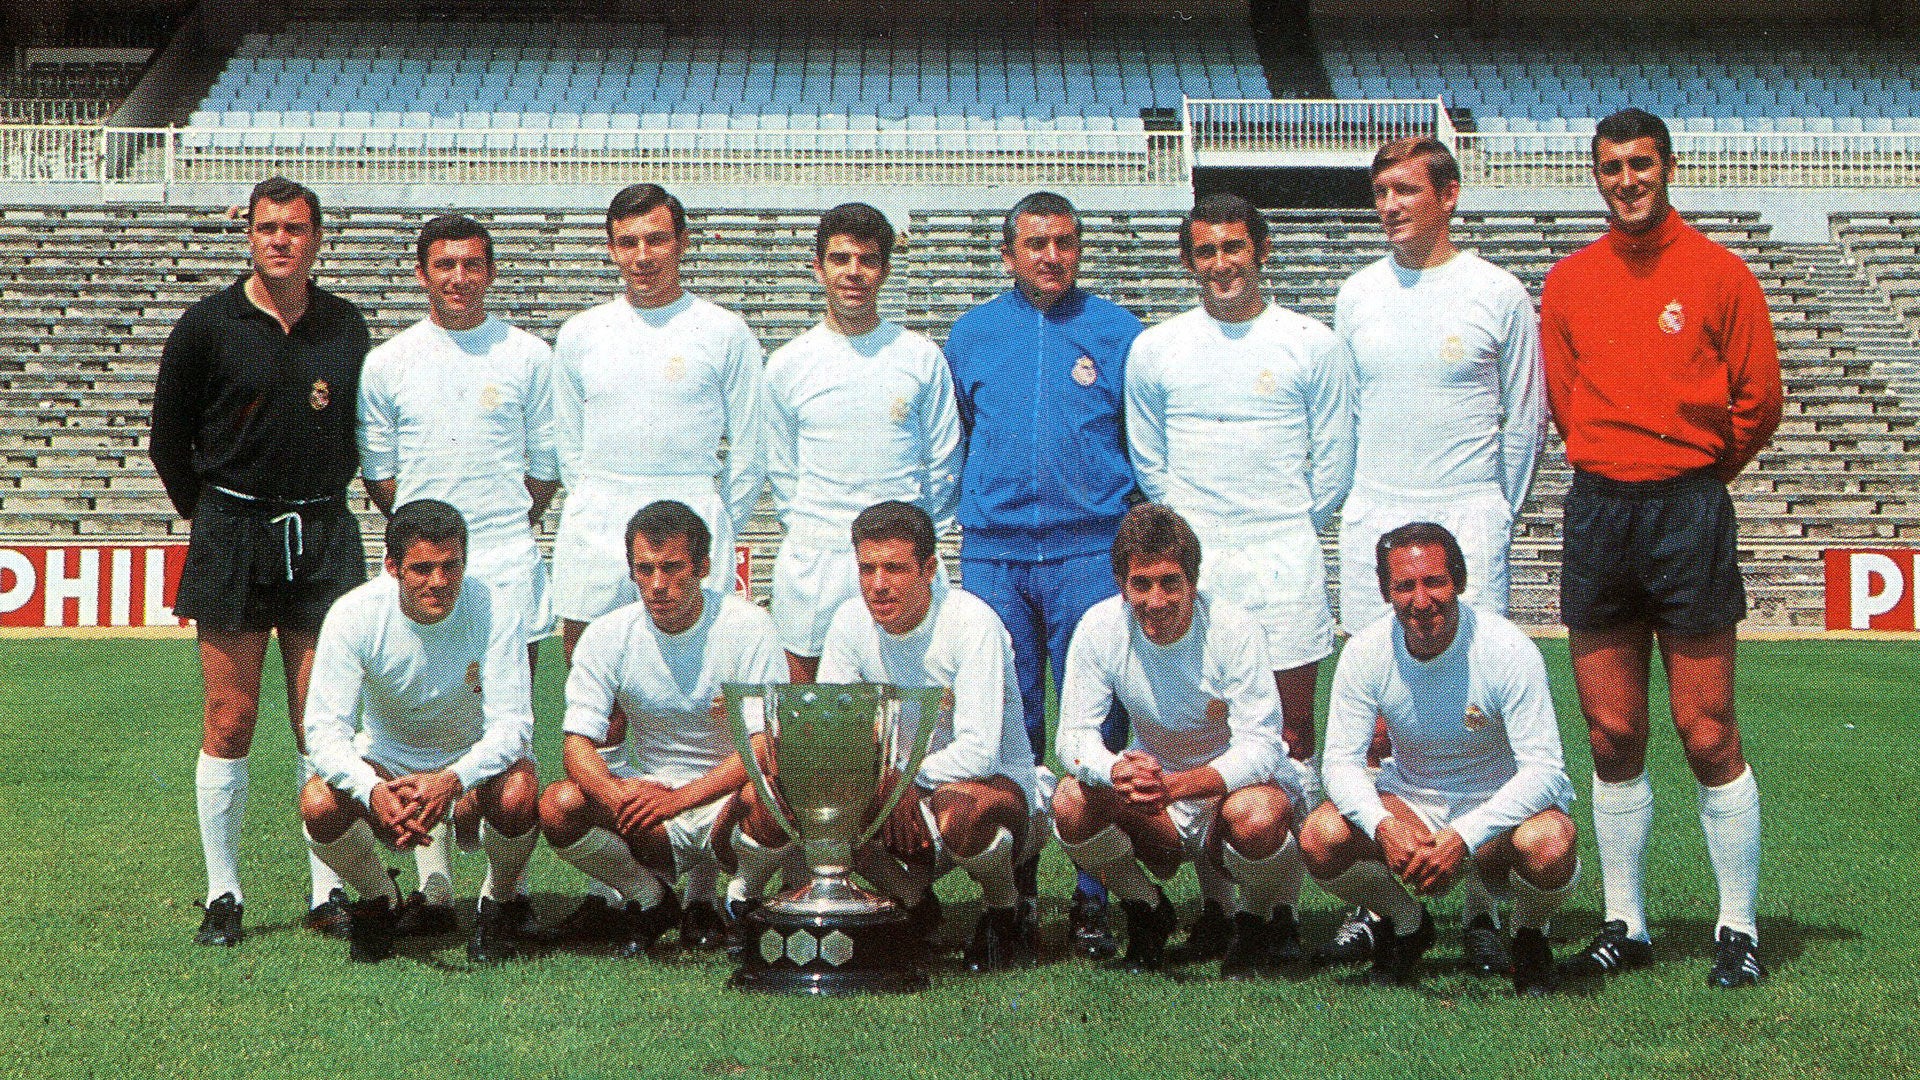 We won our 14th LaLiga title 55 years ago